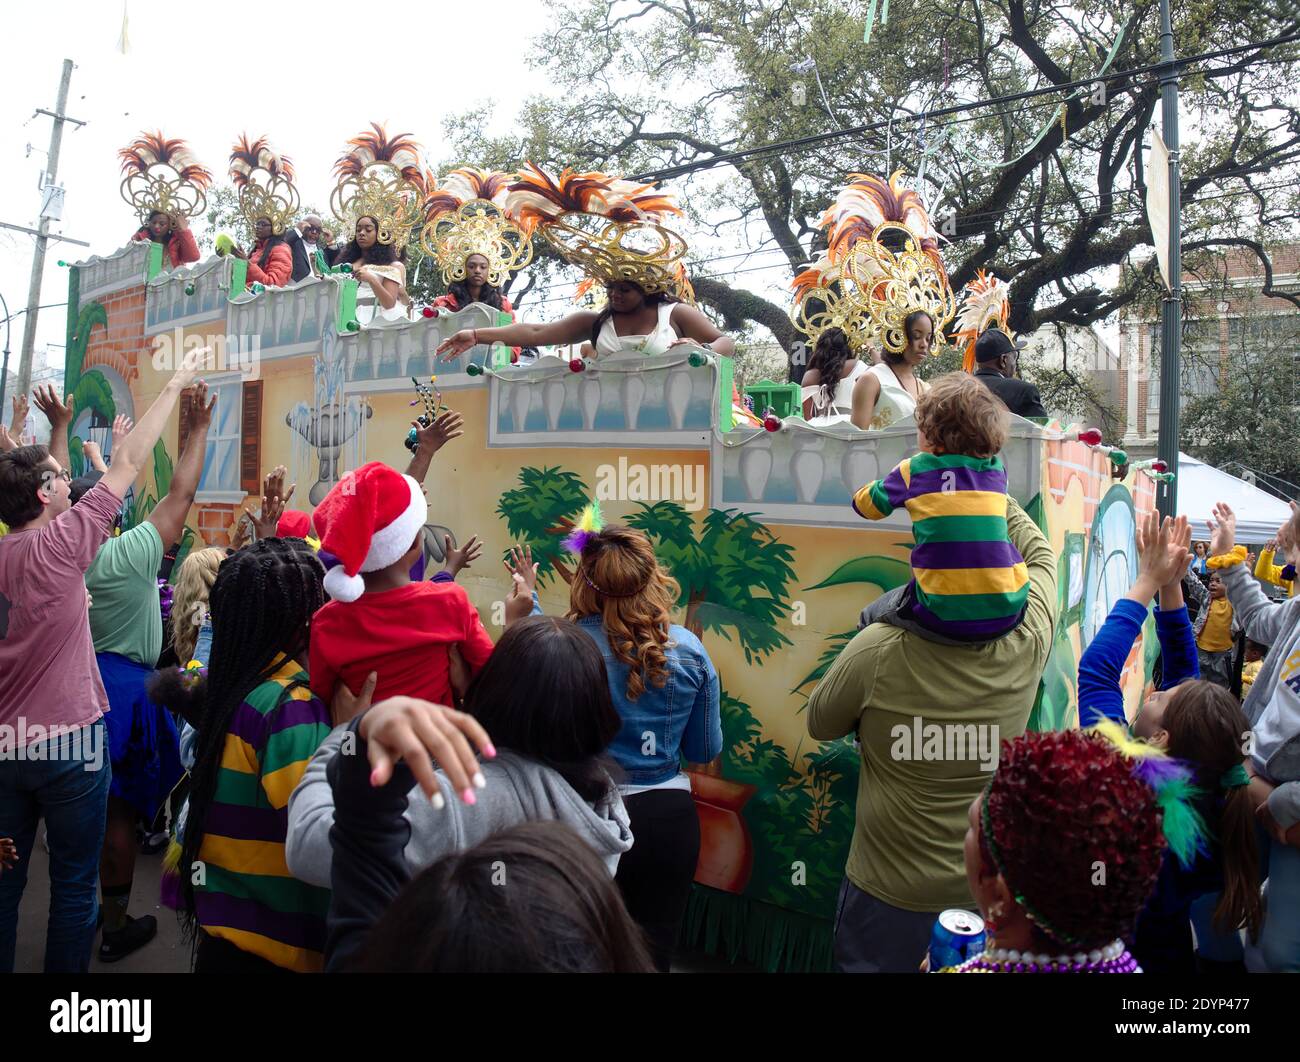 New Orleans, Louisiana, USA -  February 25, 2020: People celebrate Mardi Gras during the traditional Zulu parade, one of the main city parades. Stock Photo